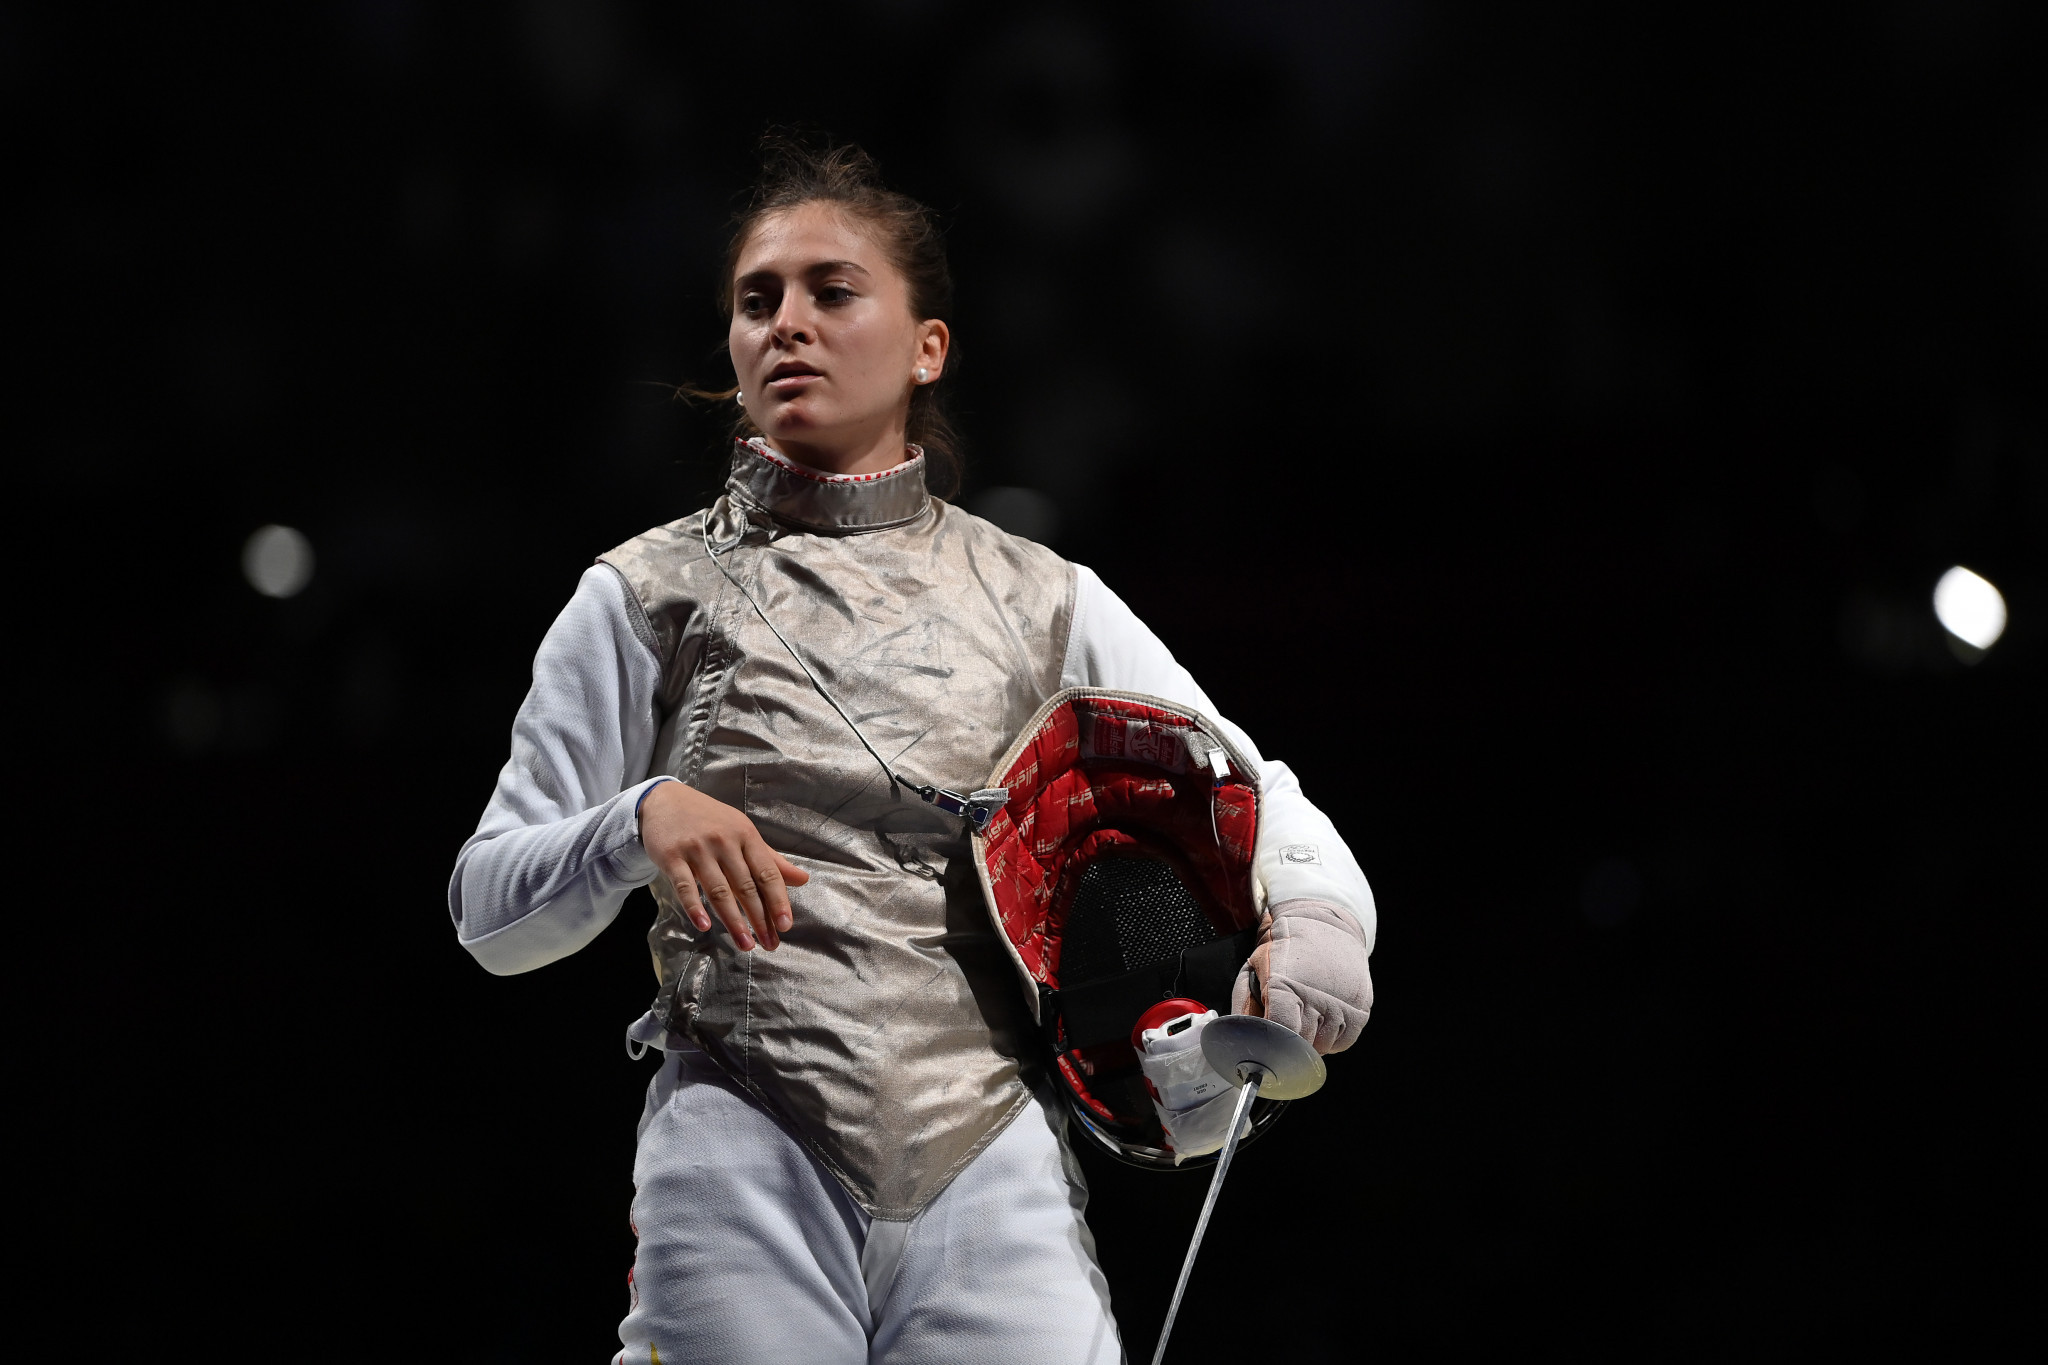 Georgia and Germany secure first golds at European Fencing Championships